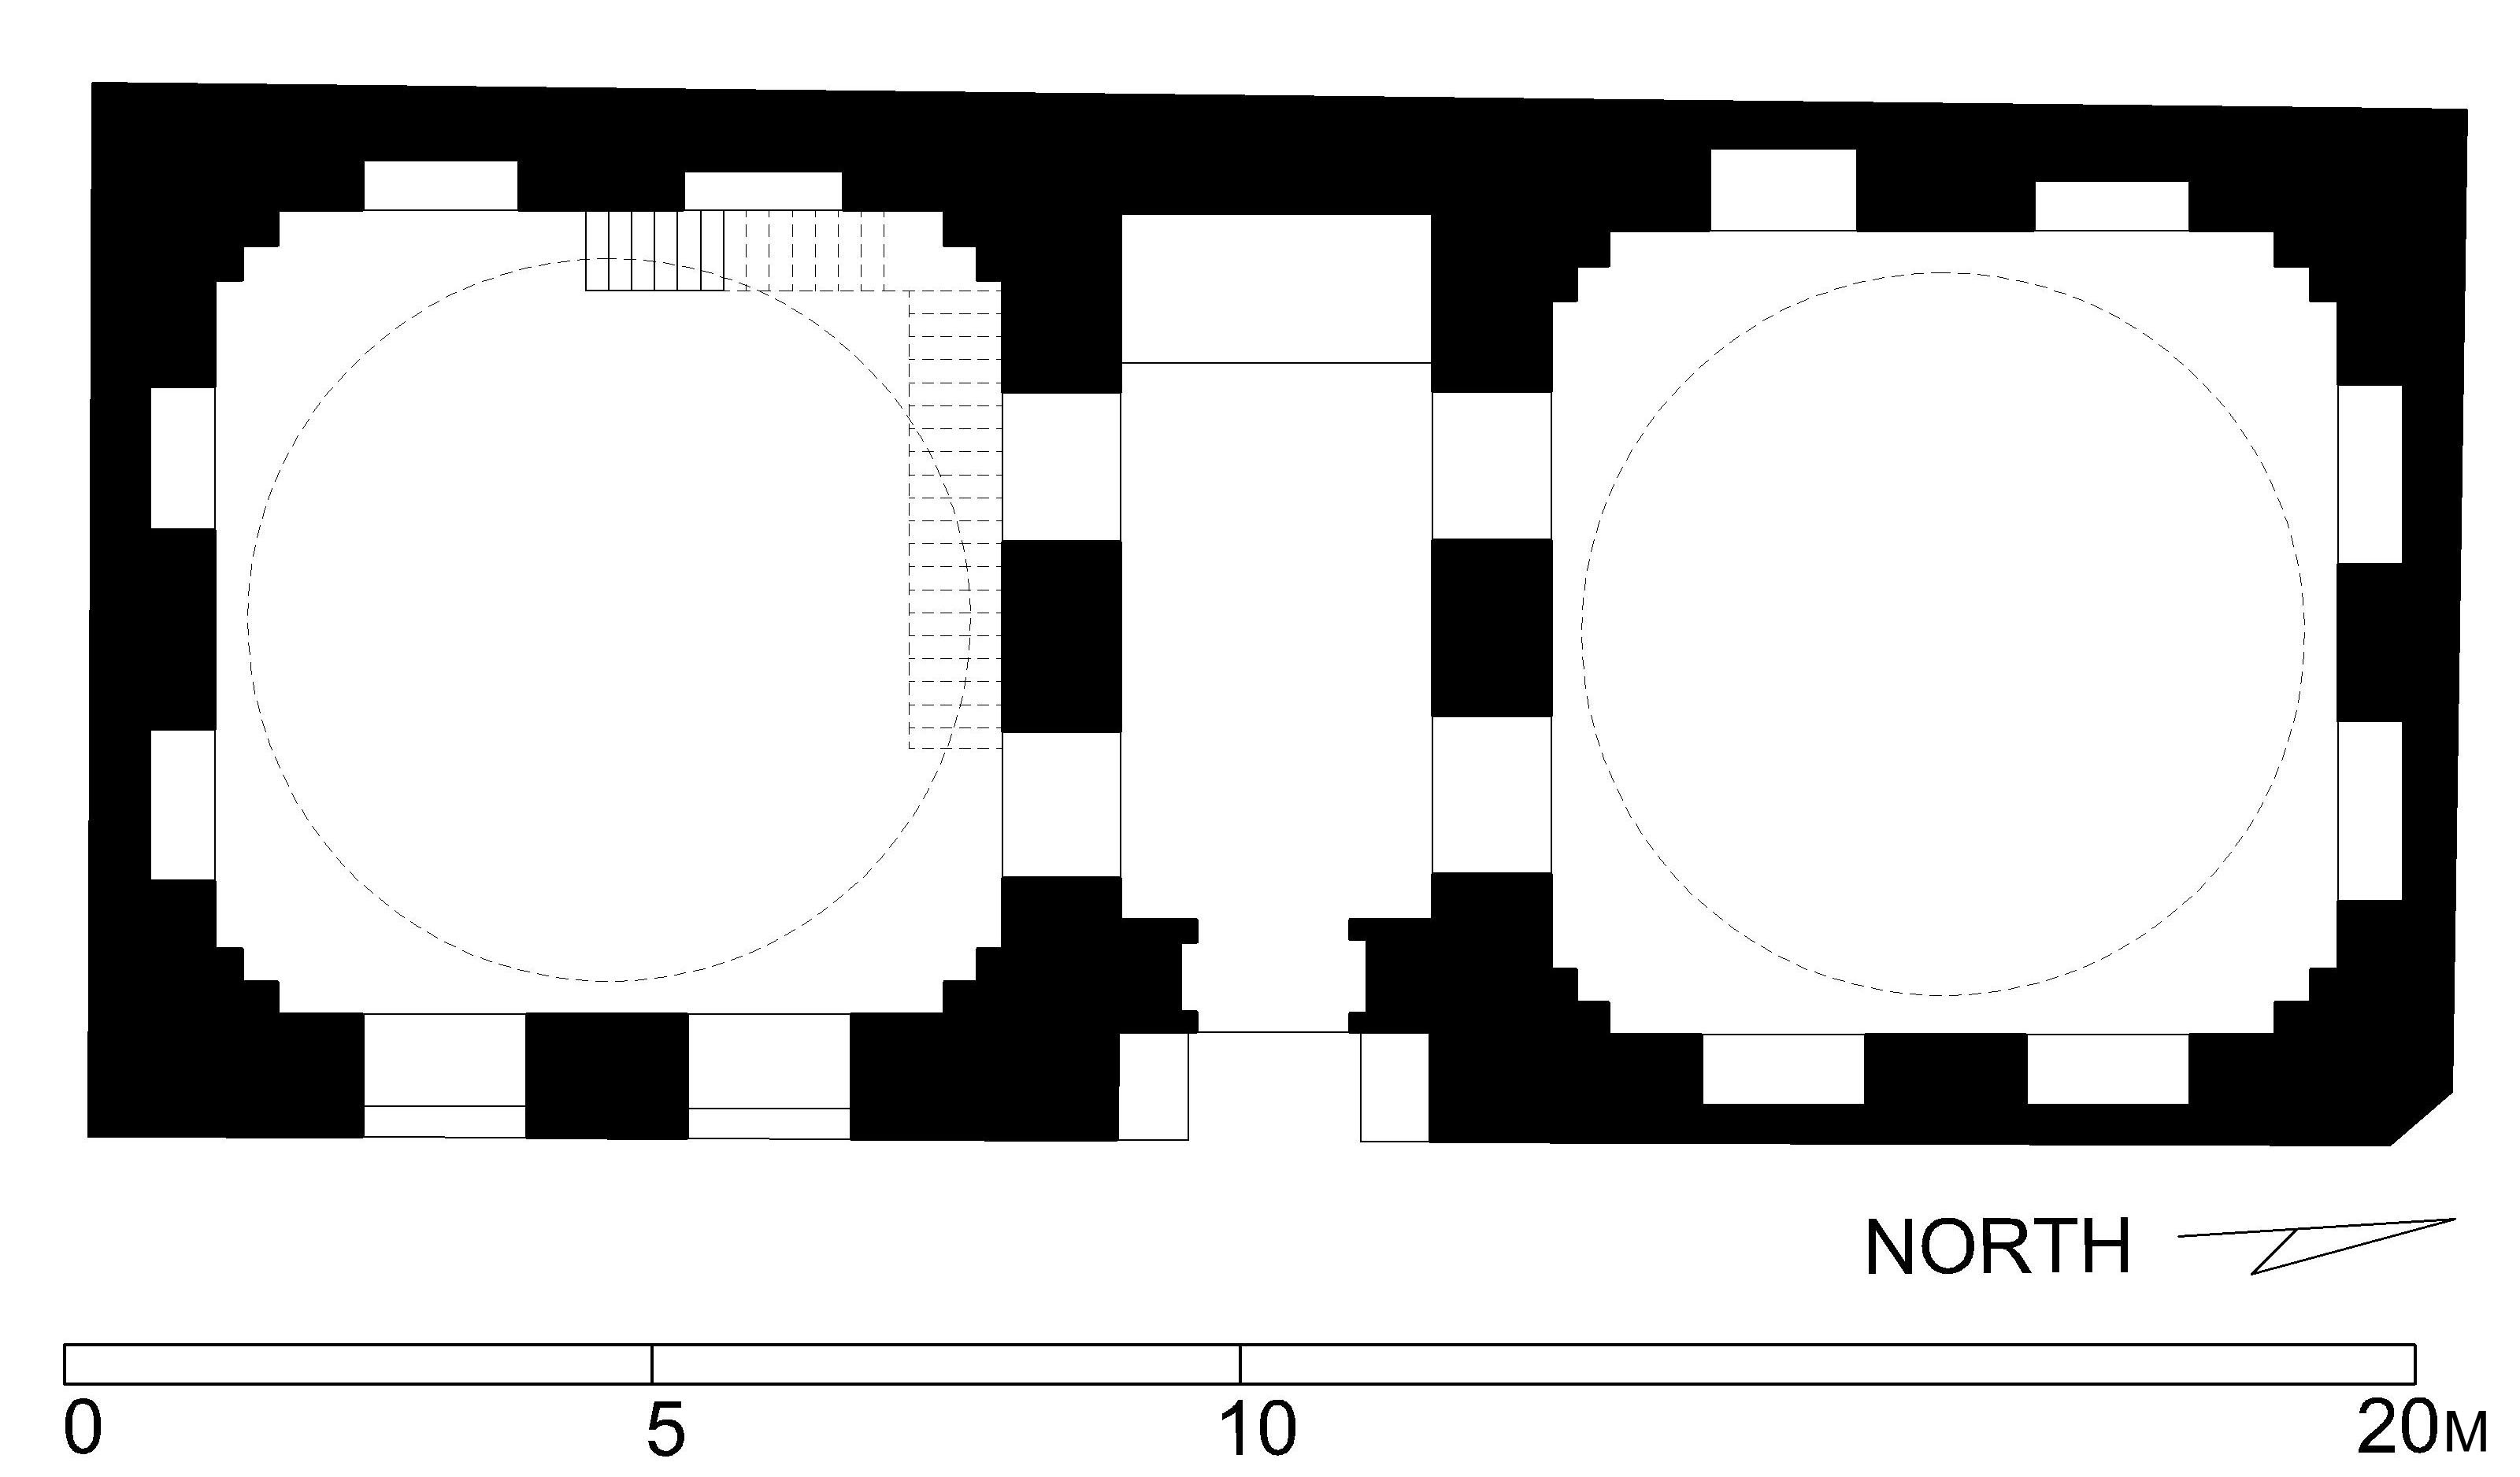 Madrasa al-Rashidiyya - Floor plan of funerary madrasa (after Meinecke) in AutoCAD 2000 format. Click the download button to download a zipped file containing the .dwg file.